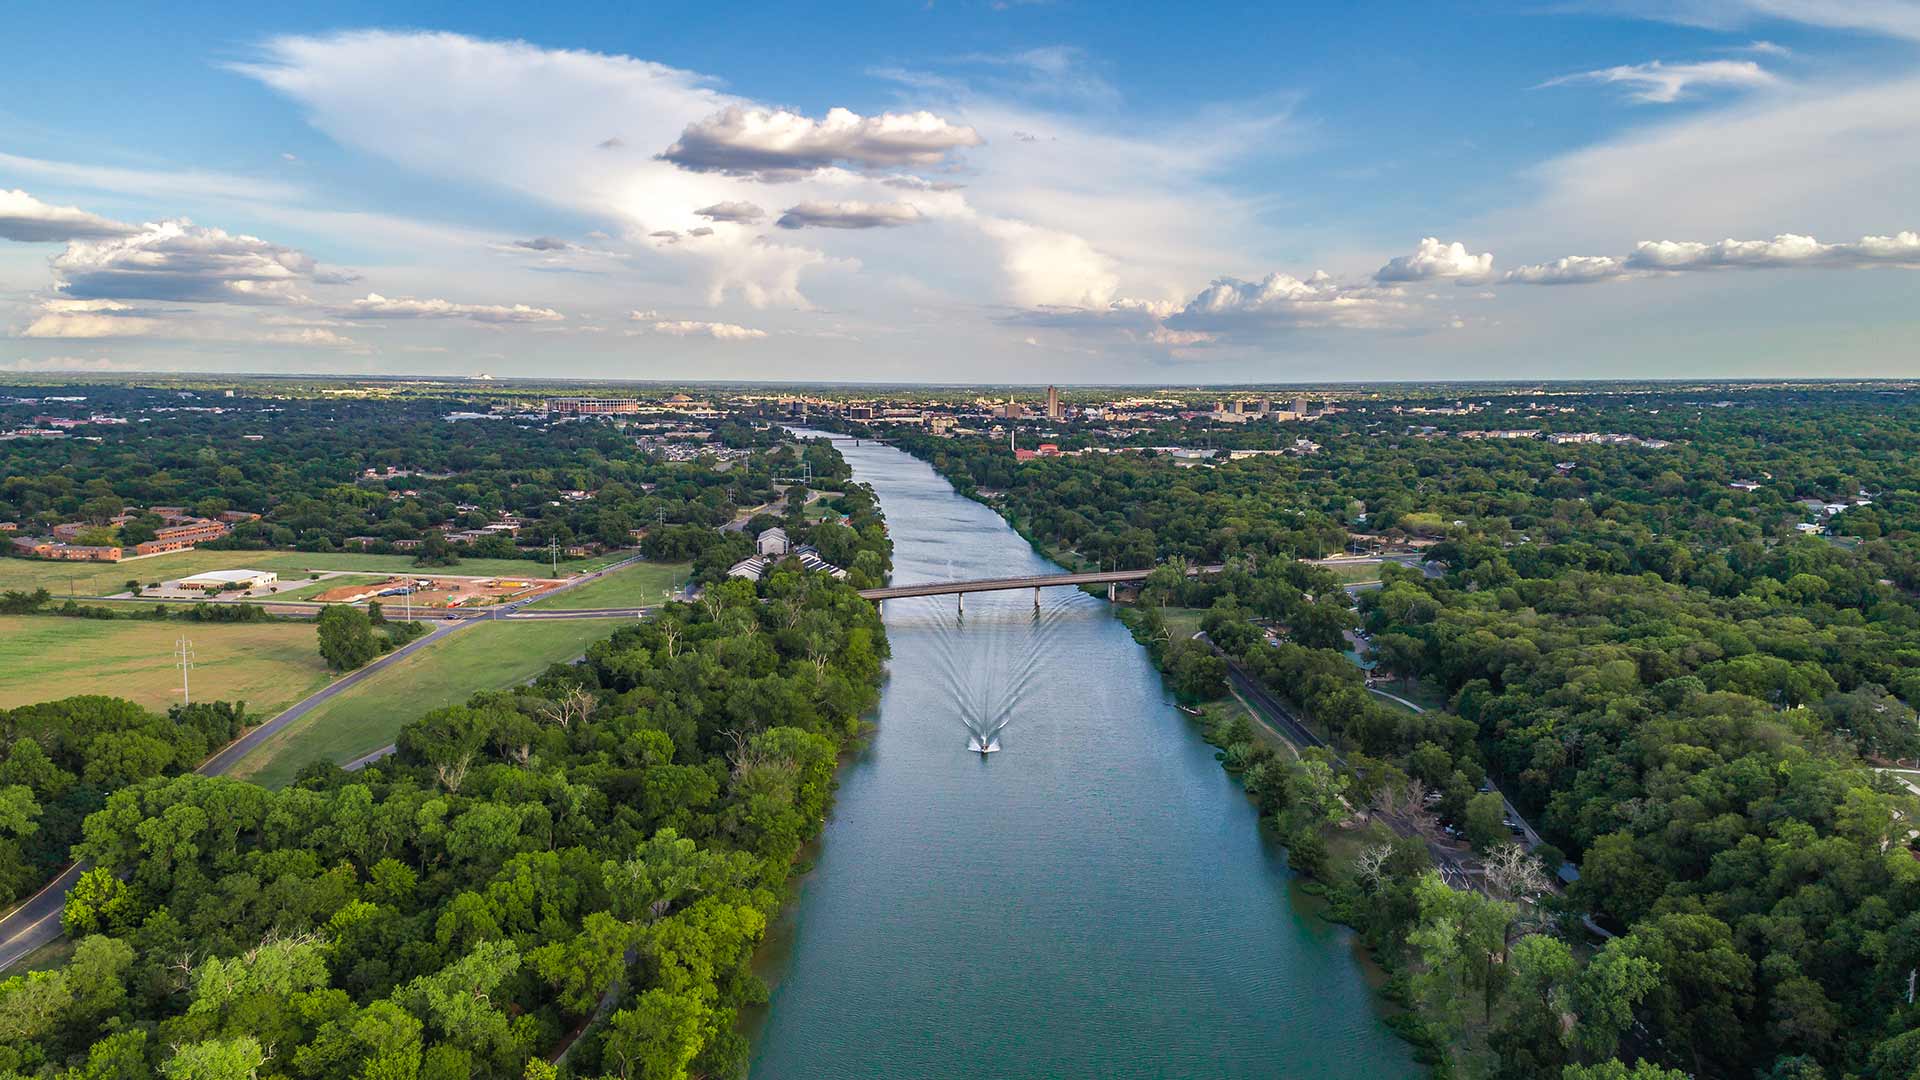 Aerial view of the Brazos River and Waco, Texas skyline in the background.